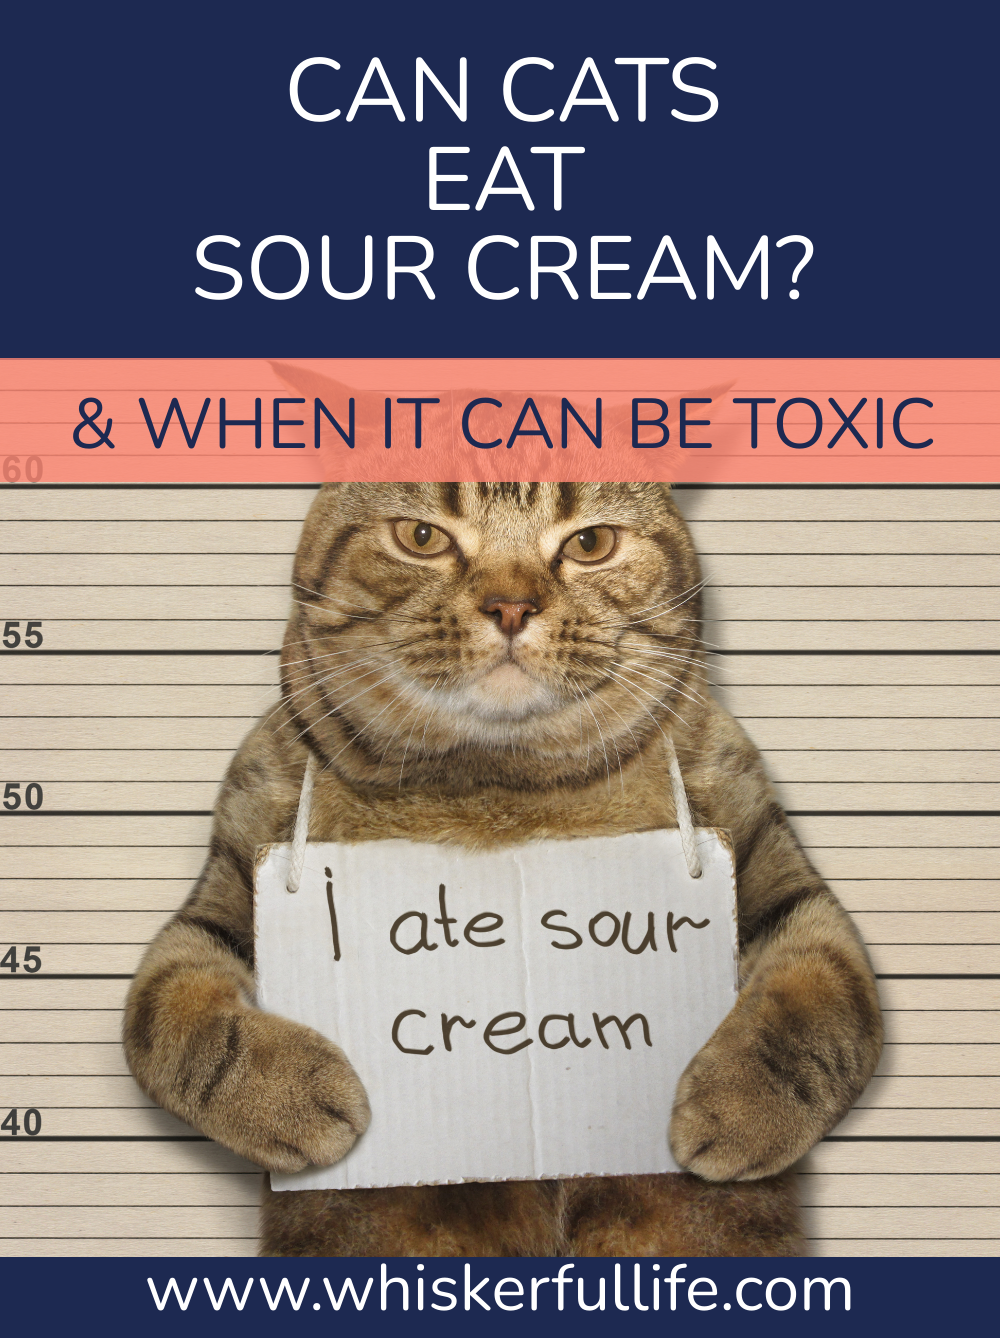 Can cats eat sour cream?